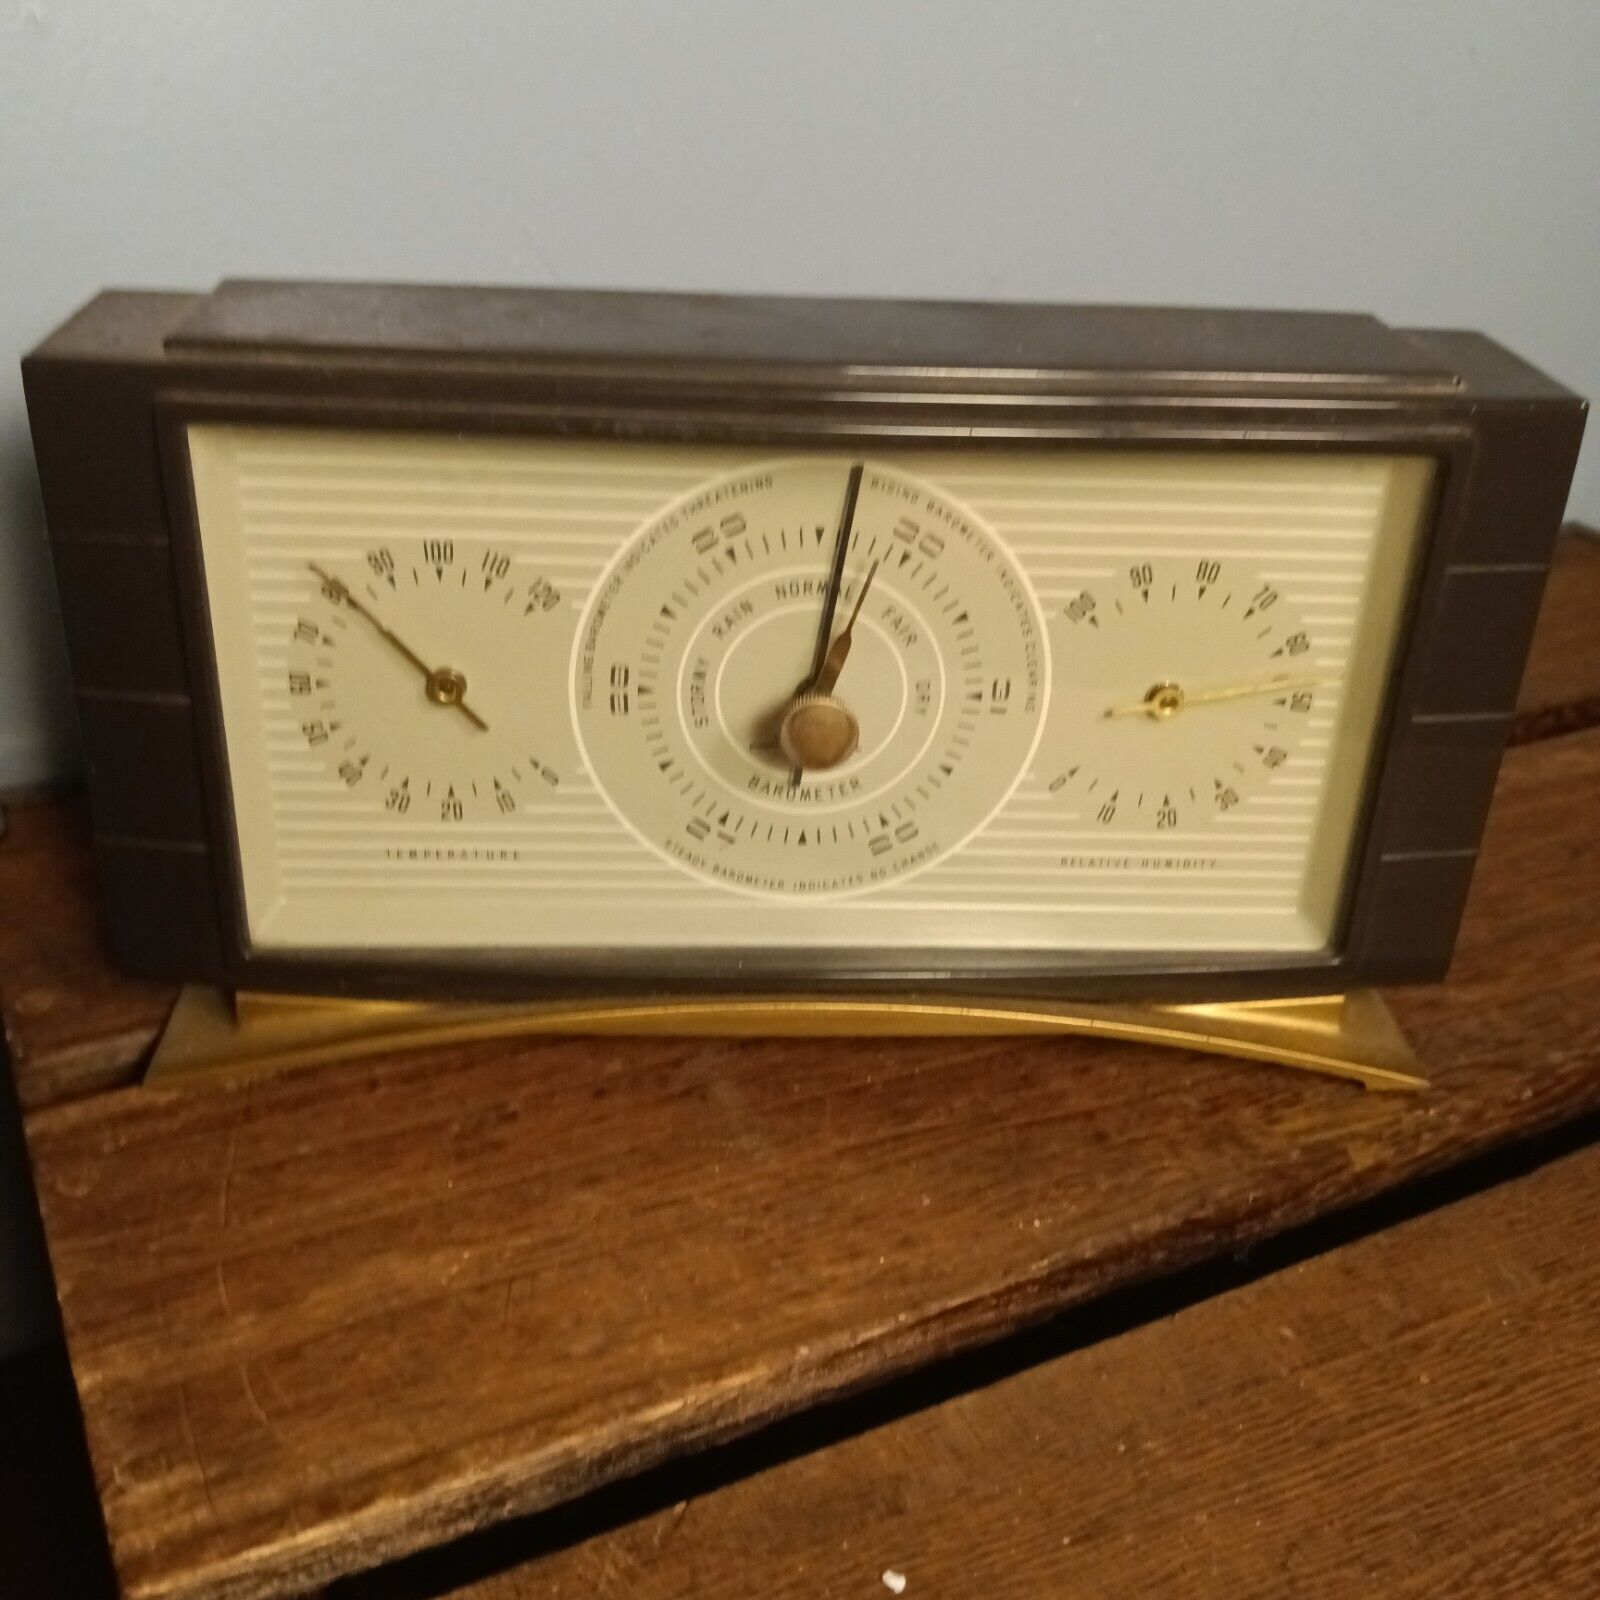 Vintage Airguide Weather Station - Barometer, Temperature, Humidity, Art Deco